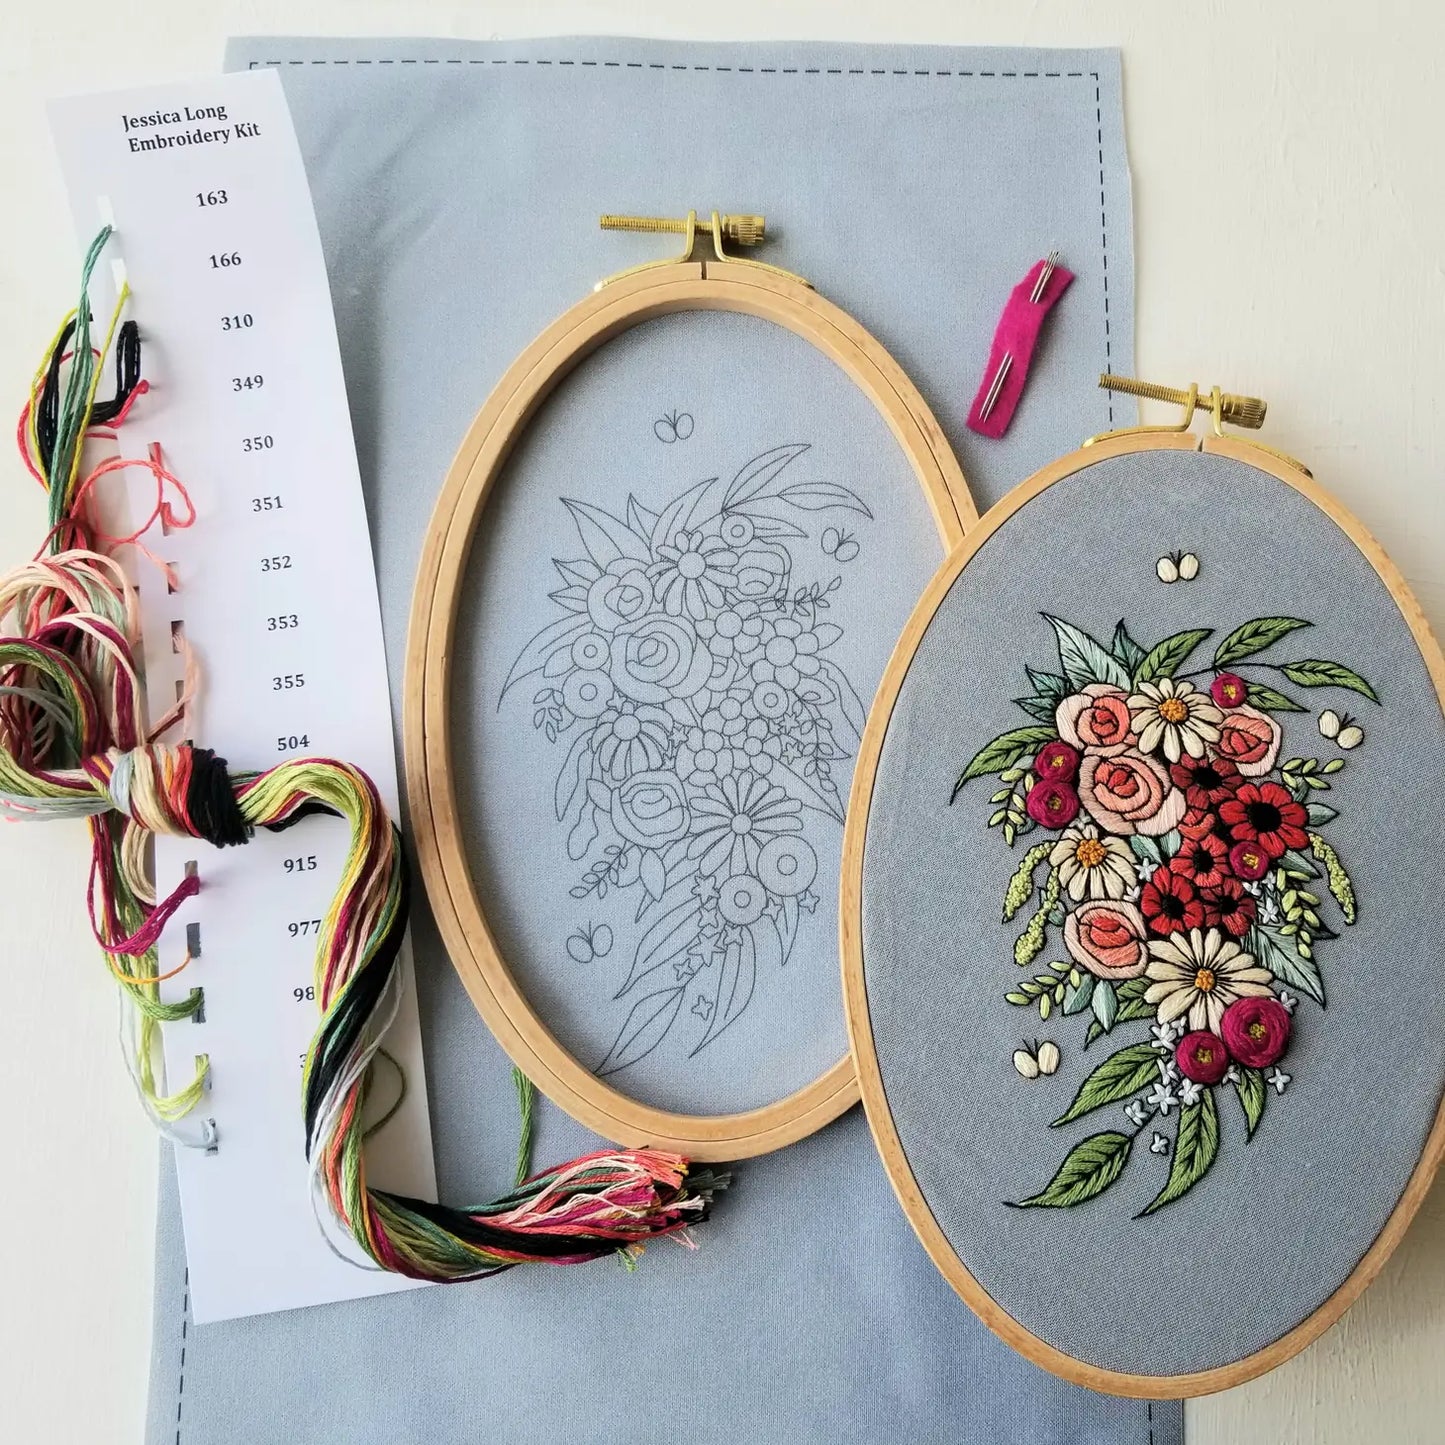 Butterfly Perfume Embroidery Kit | Jessica Long Embroidery